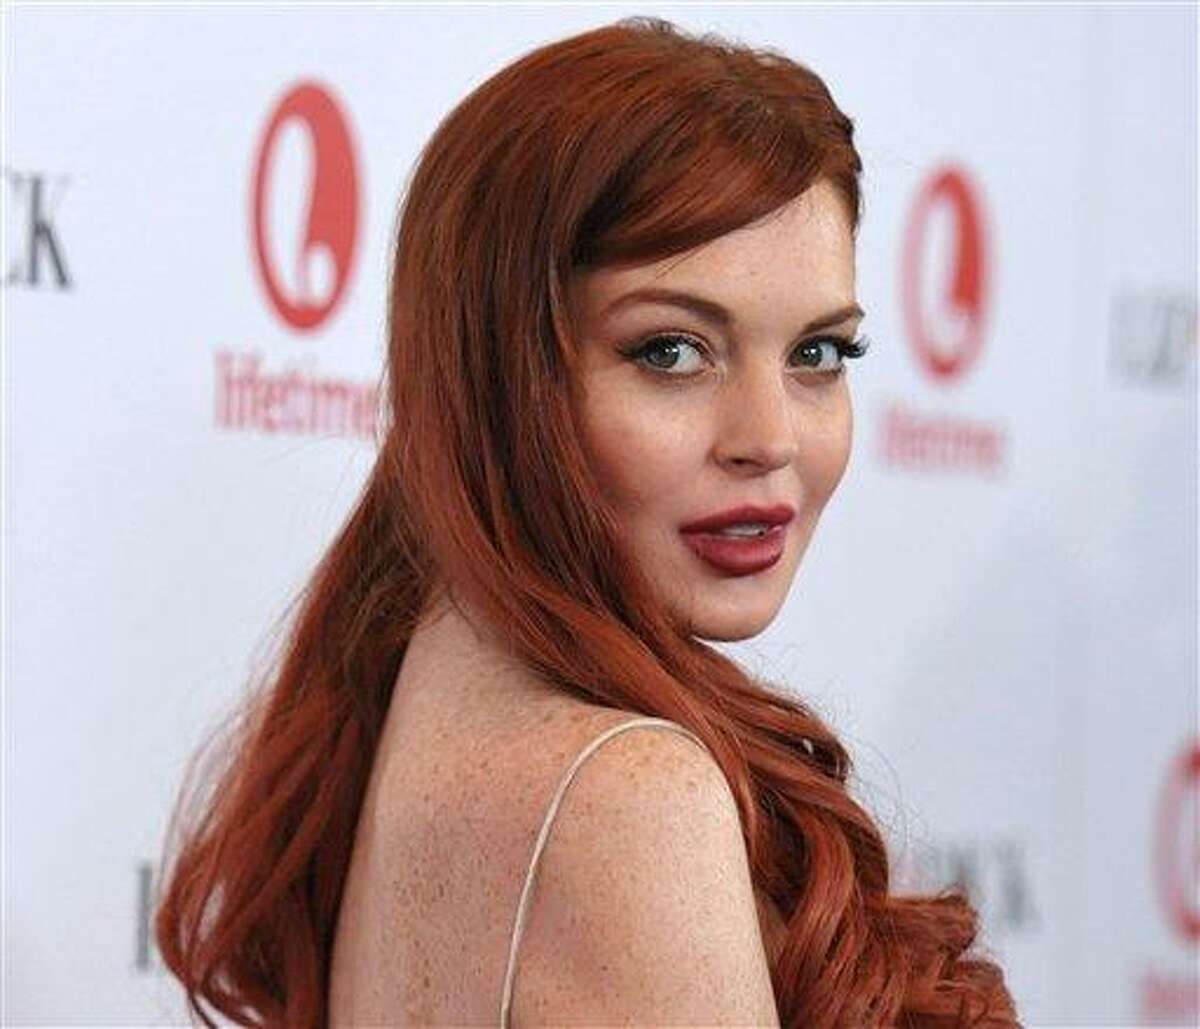 Lindsay Lohan attends a dinner celebrating the premiere of "Liz & Dick" at the Beverly Hills Hotel in Beverly Hills, Calif. Lohan is charged with third-degree assault after police say she hit a woman during an argument at a New York City nightclub. Photo by John Shearer/Invision/AP